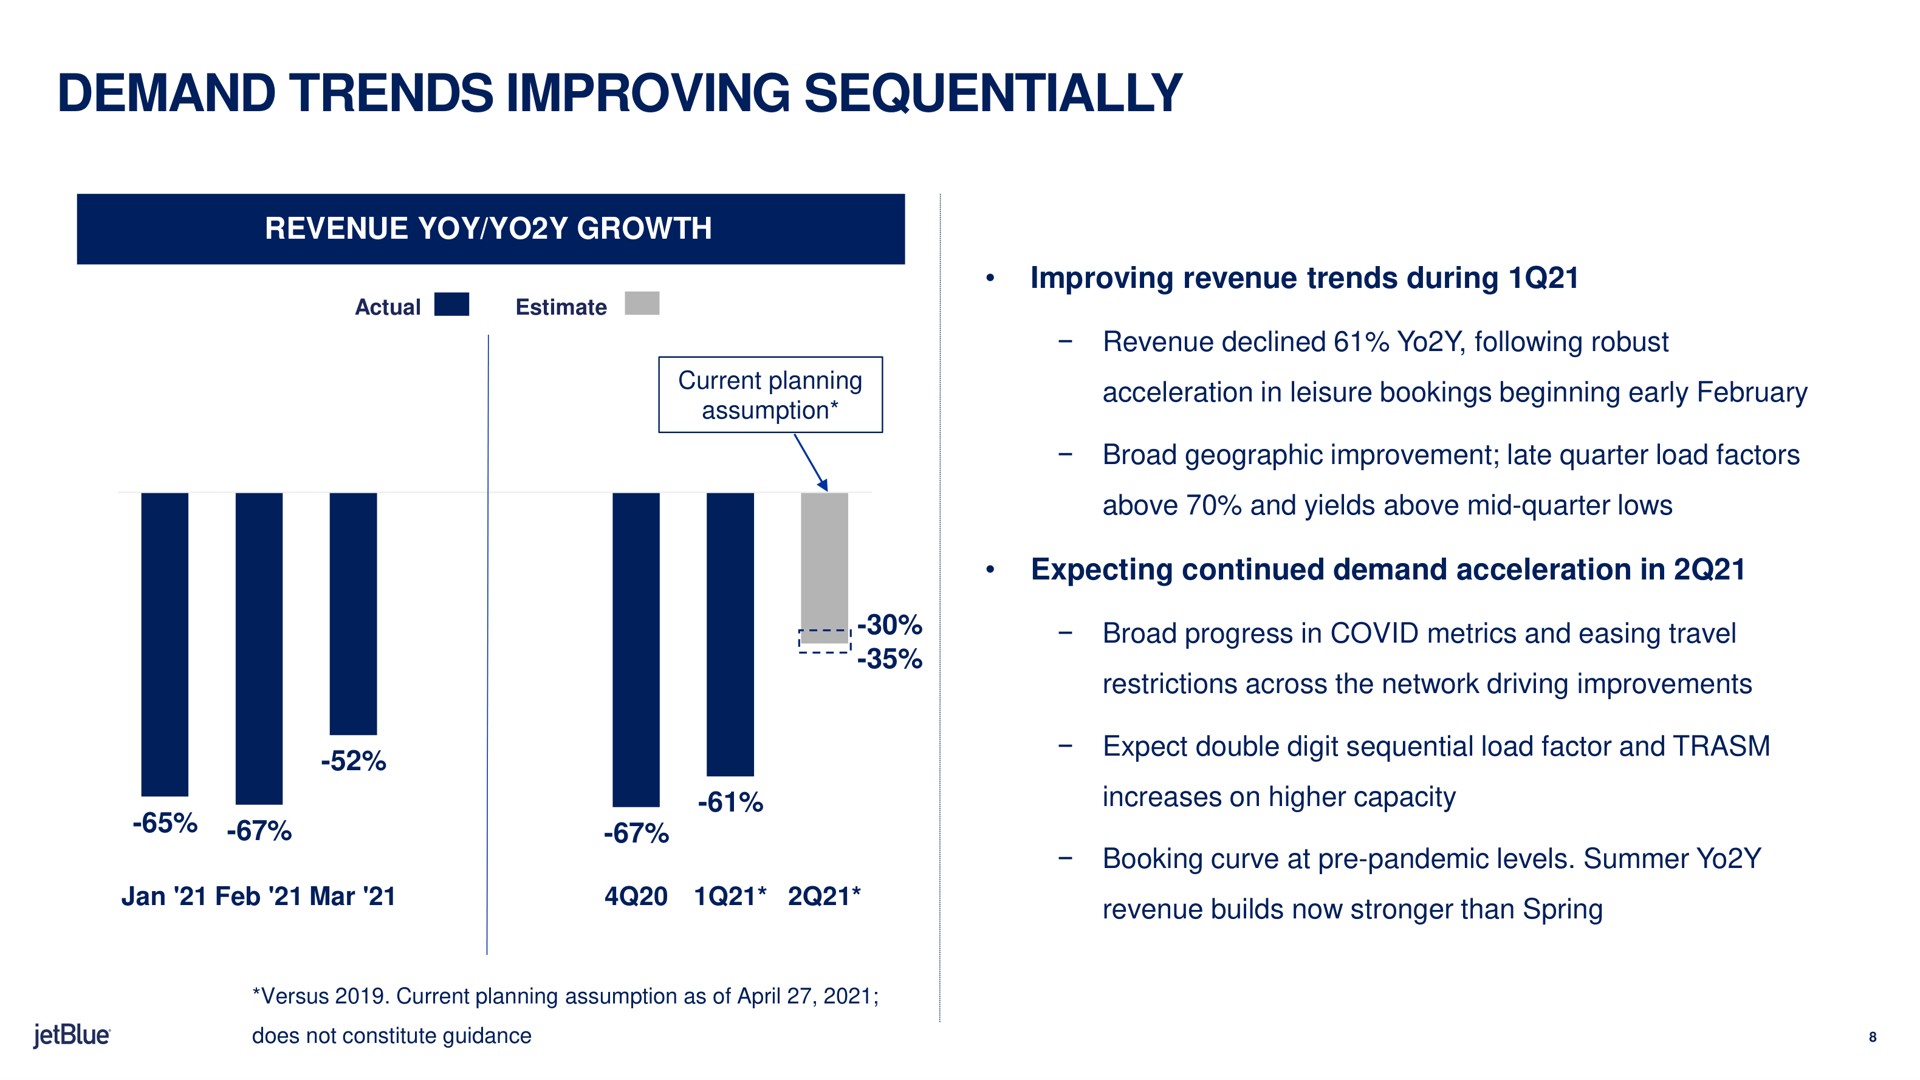 demand trends improving sequentially | jetBlue